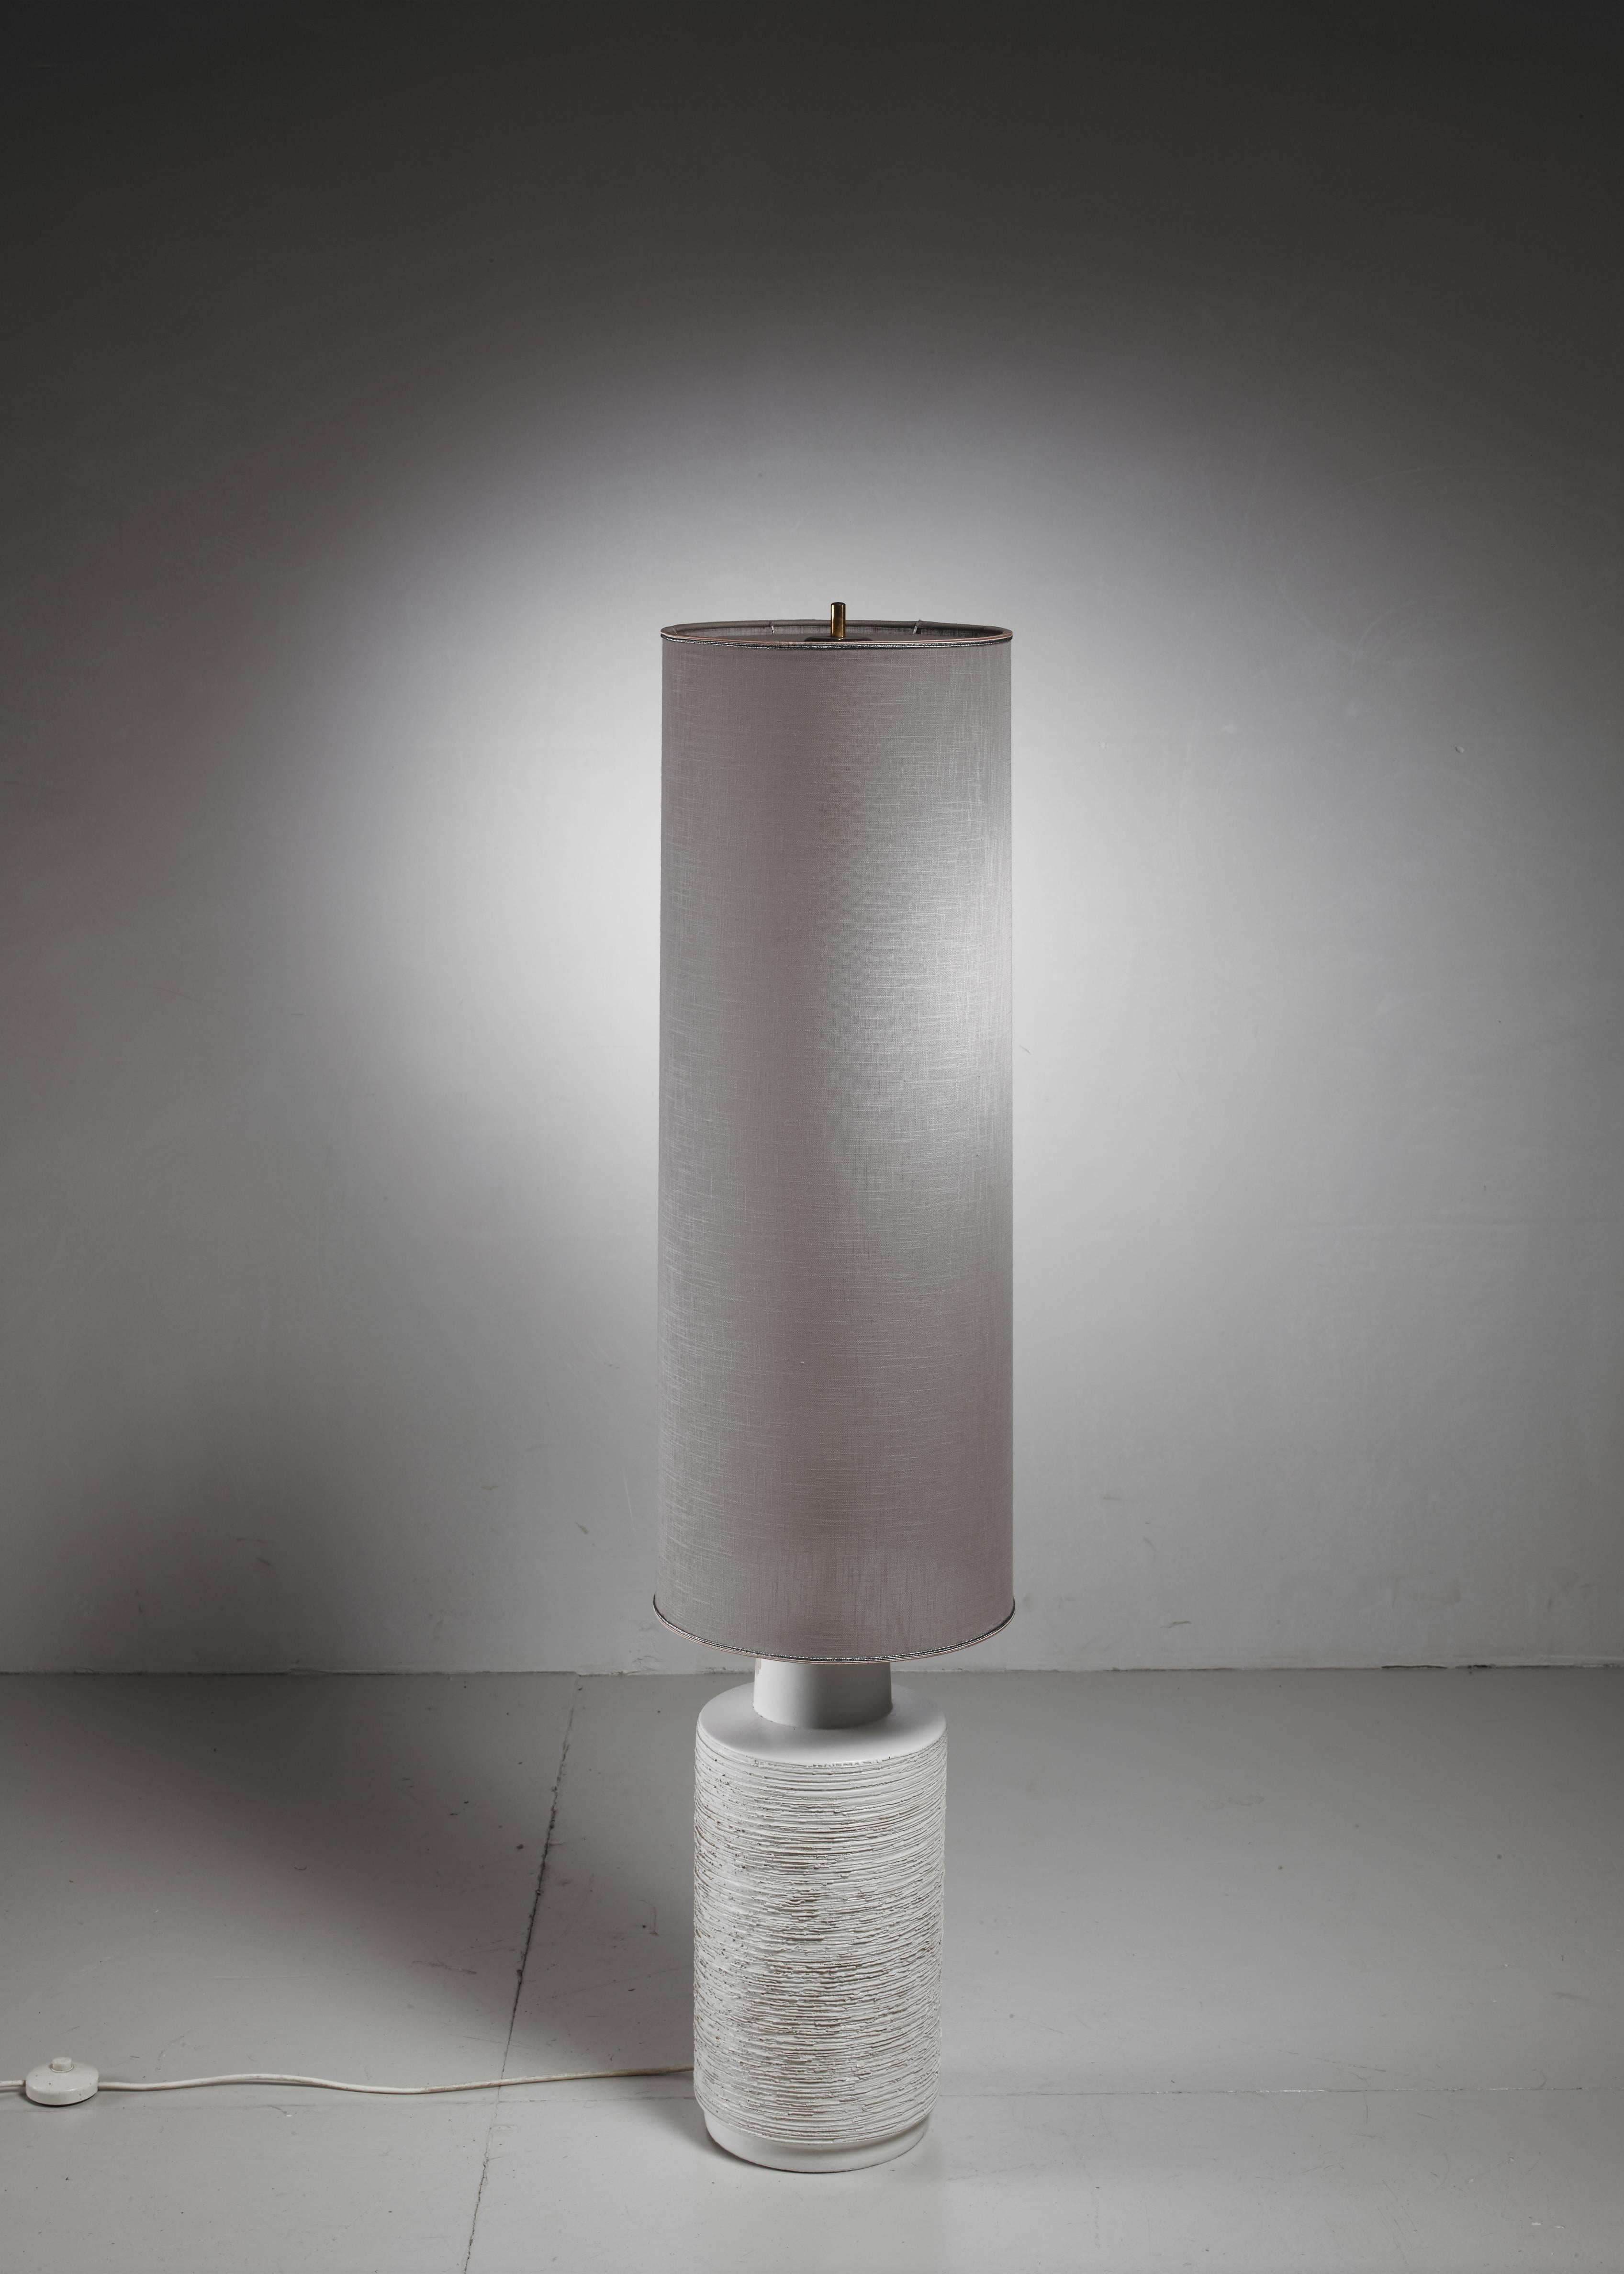 An off-white ceramic based floor lamp with a large cylindrical, grey linen shade.